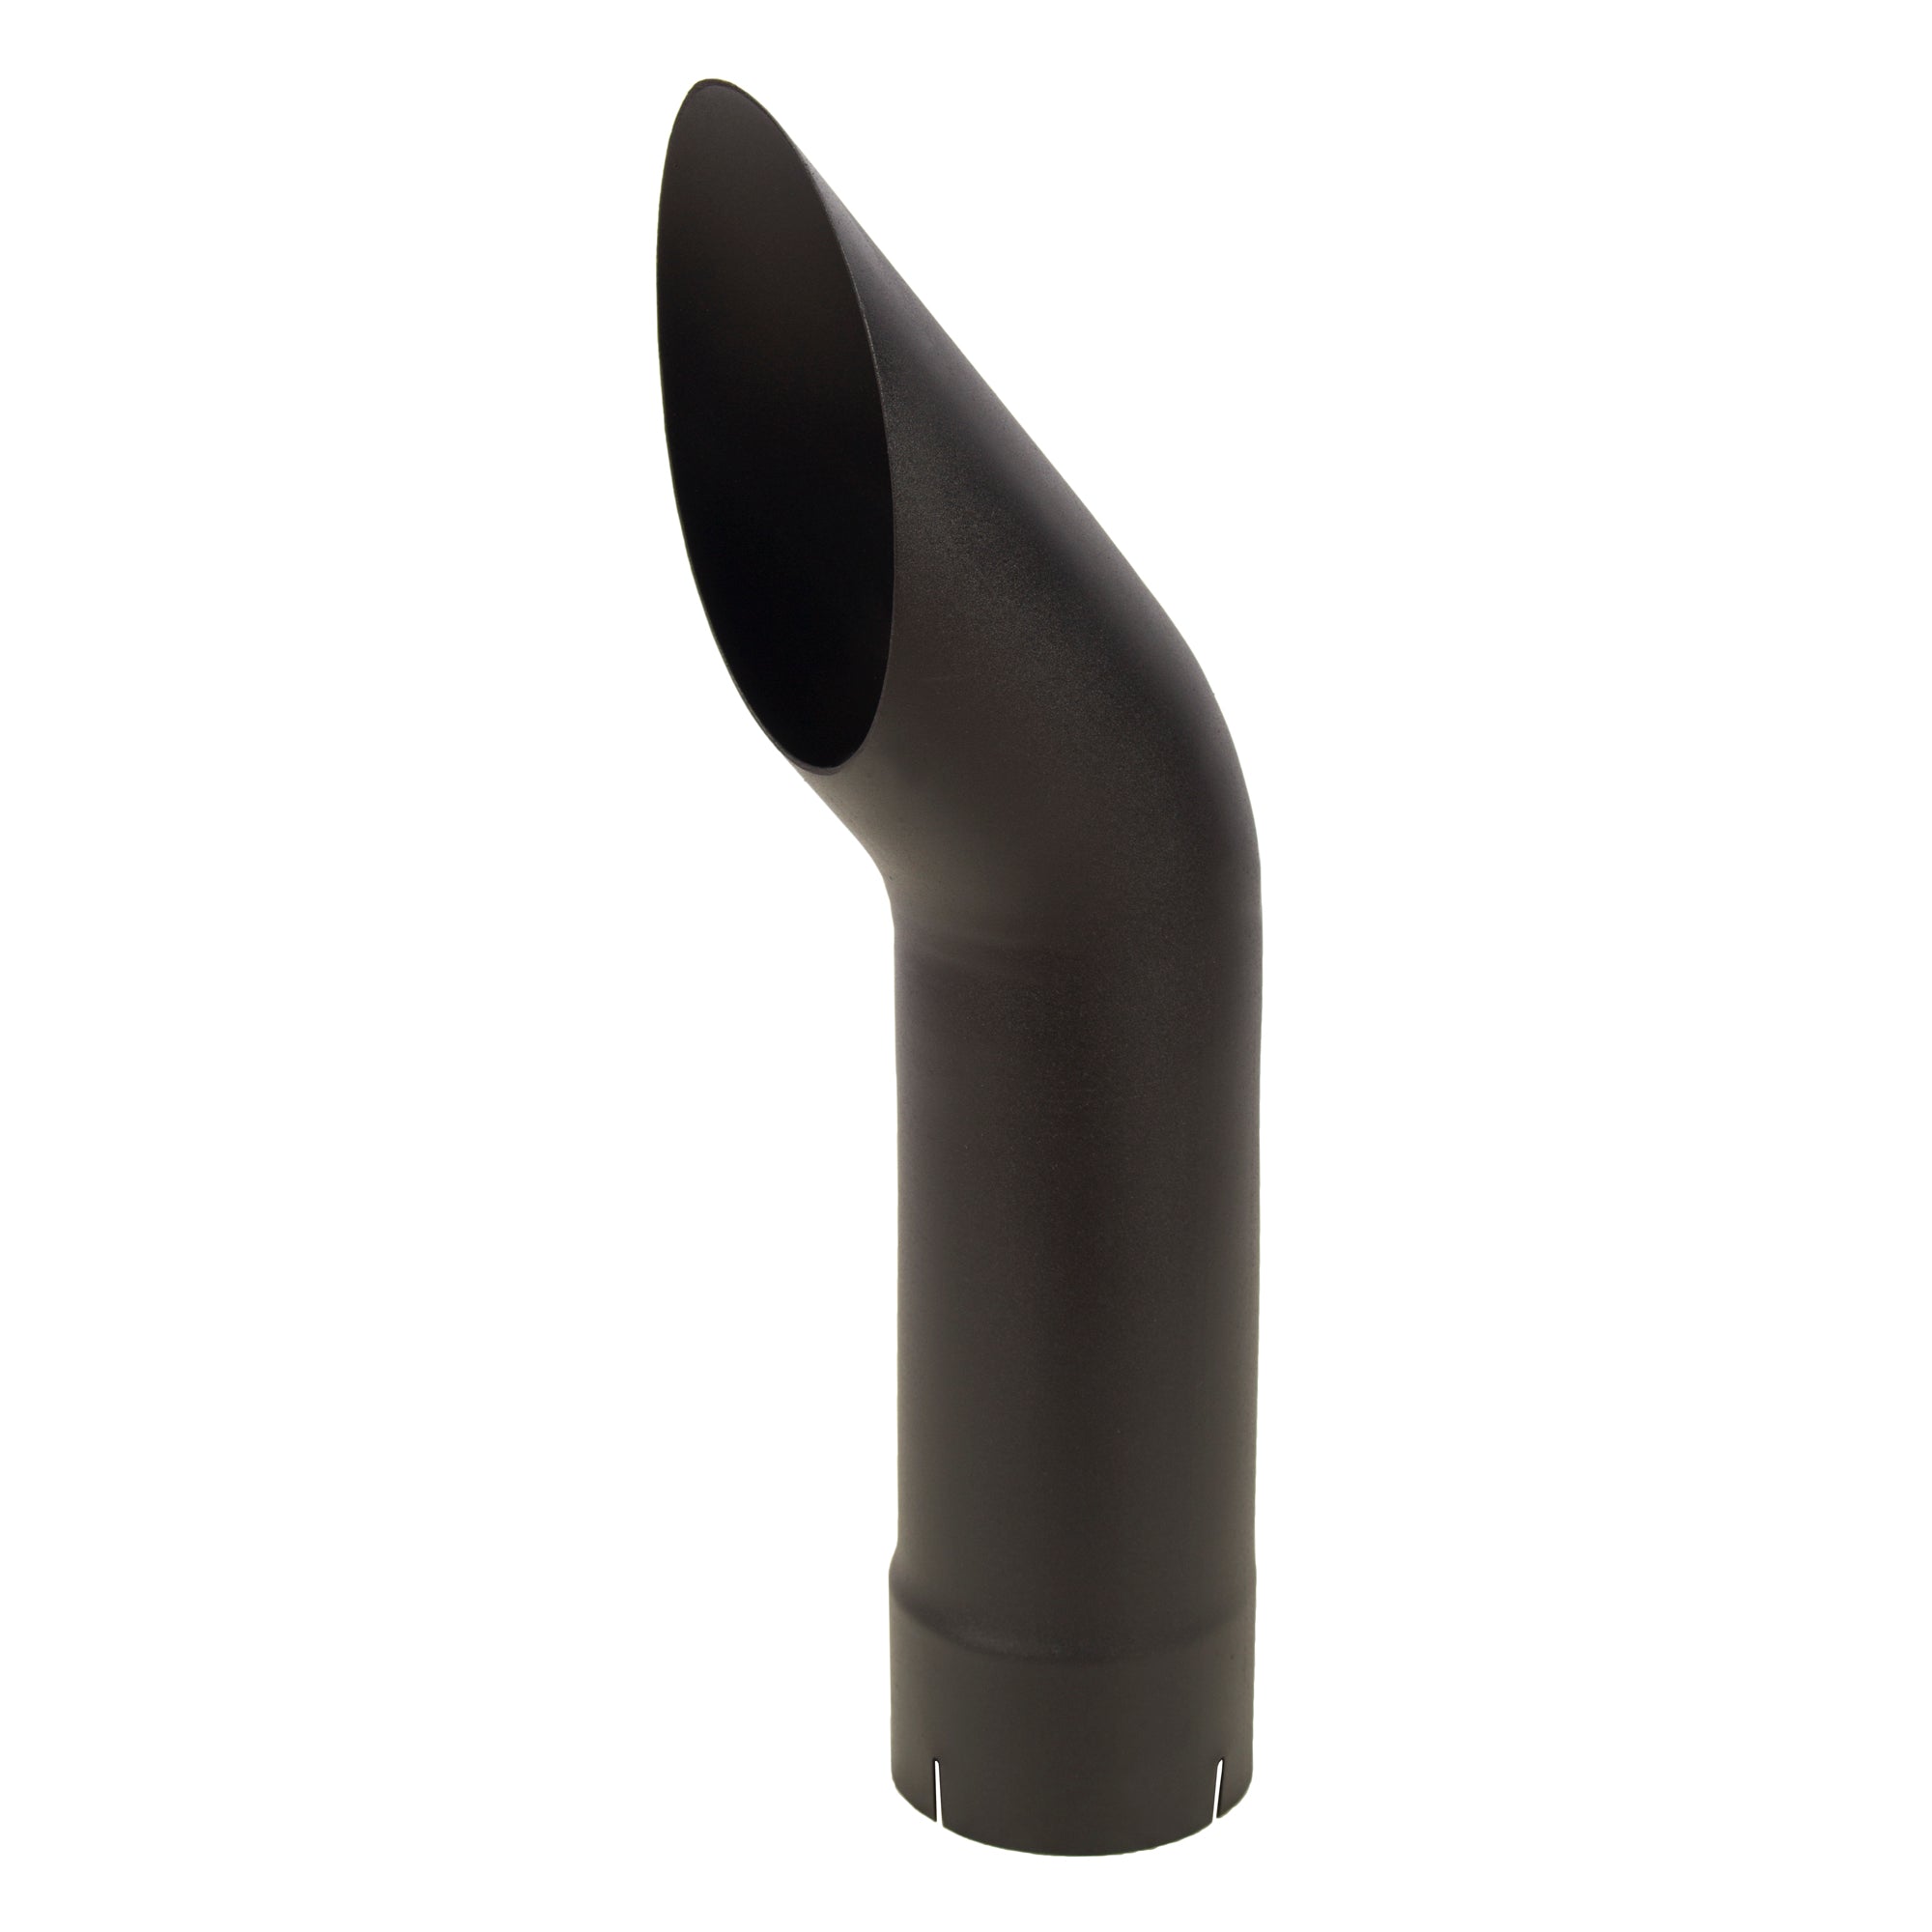 Exhaust Stack Pipe Replacement for UNIVERSAL  - 5" x 24", Curved Black